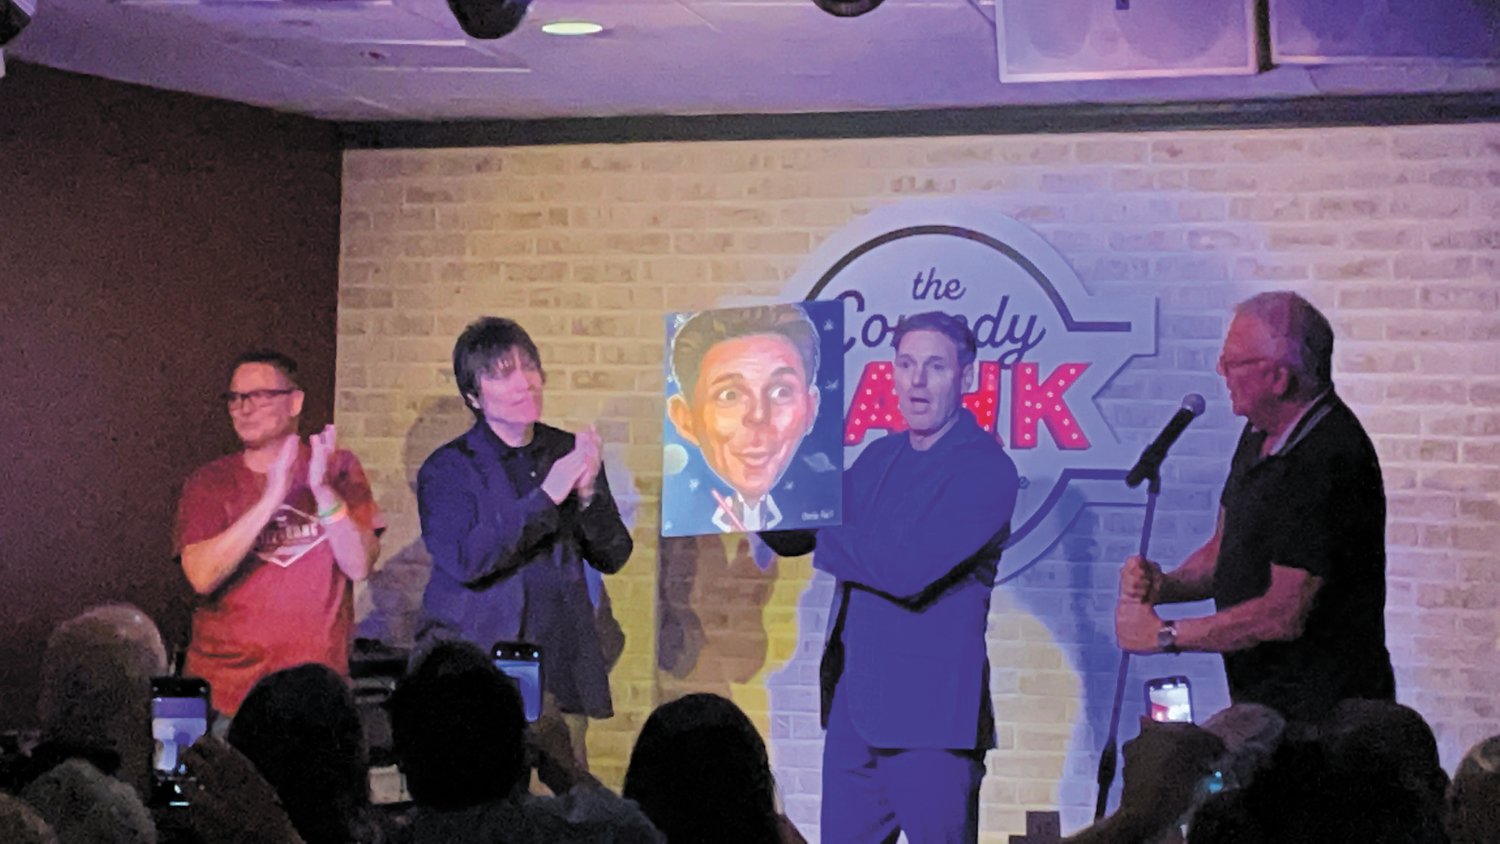 HE’S OFFICIALLY IN: From left: Ace Aceto, Joe Hebert, Al Ducharme and Charlie Hall giving Al his official caricature.